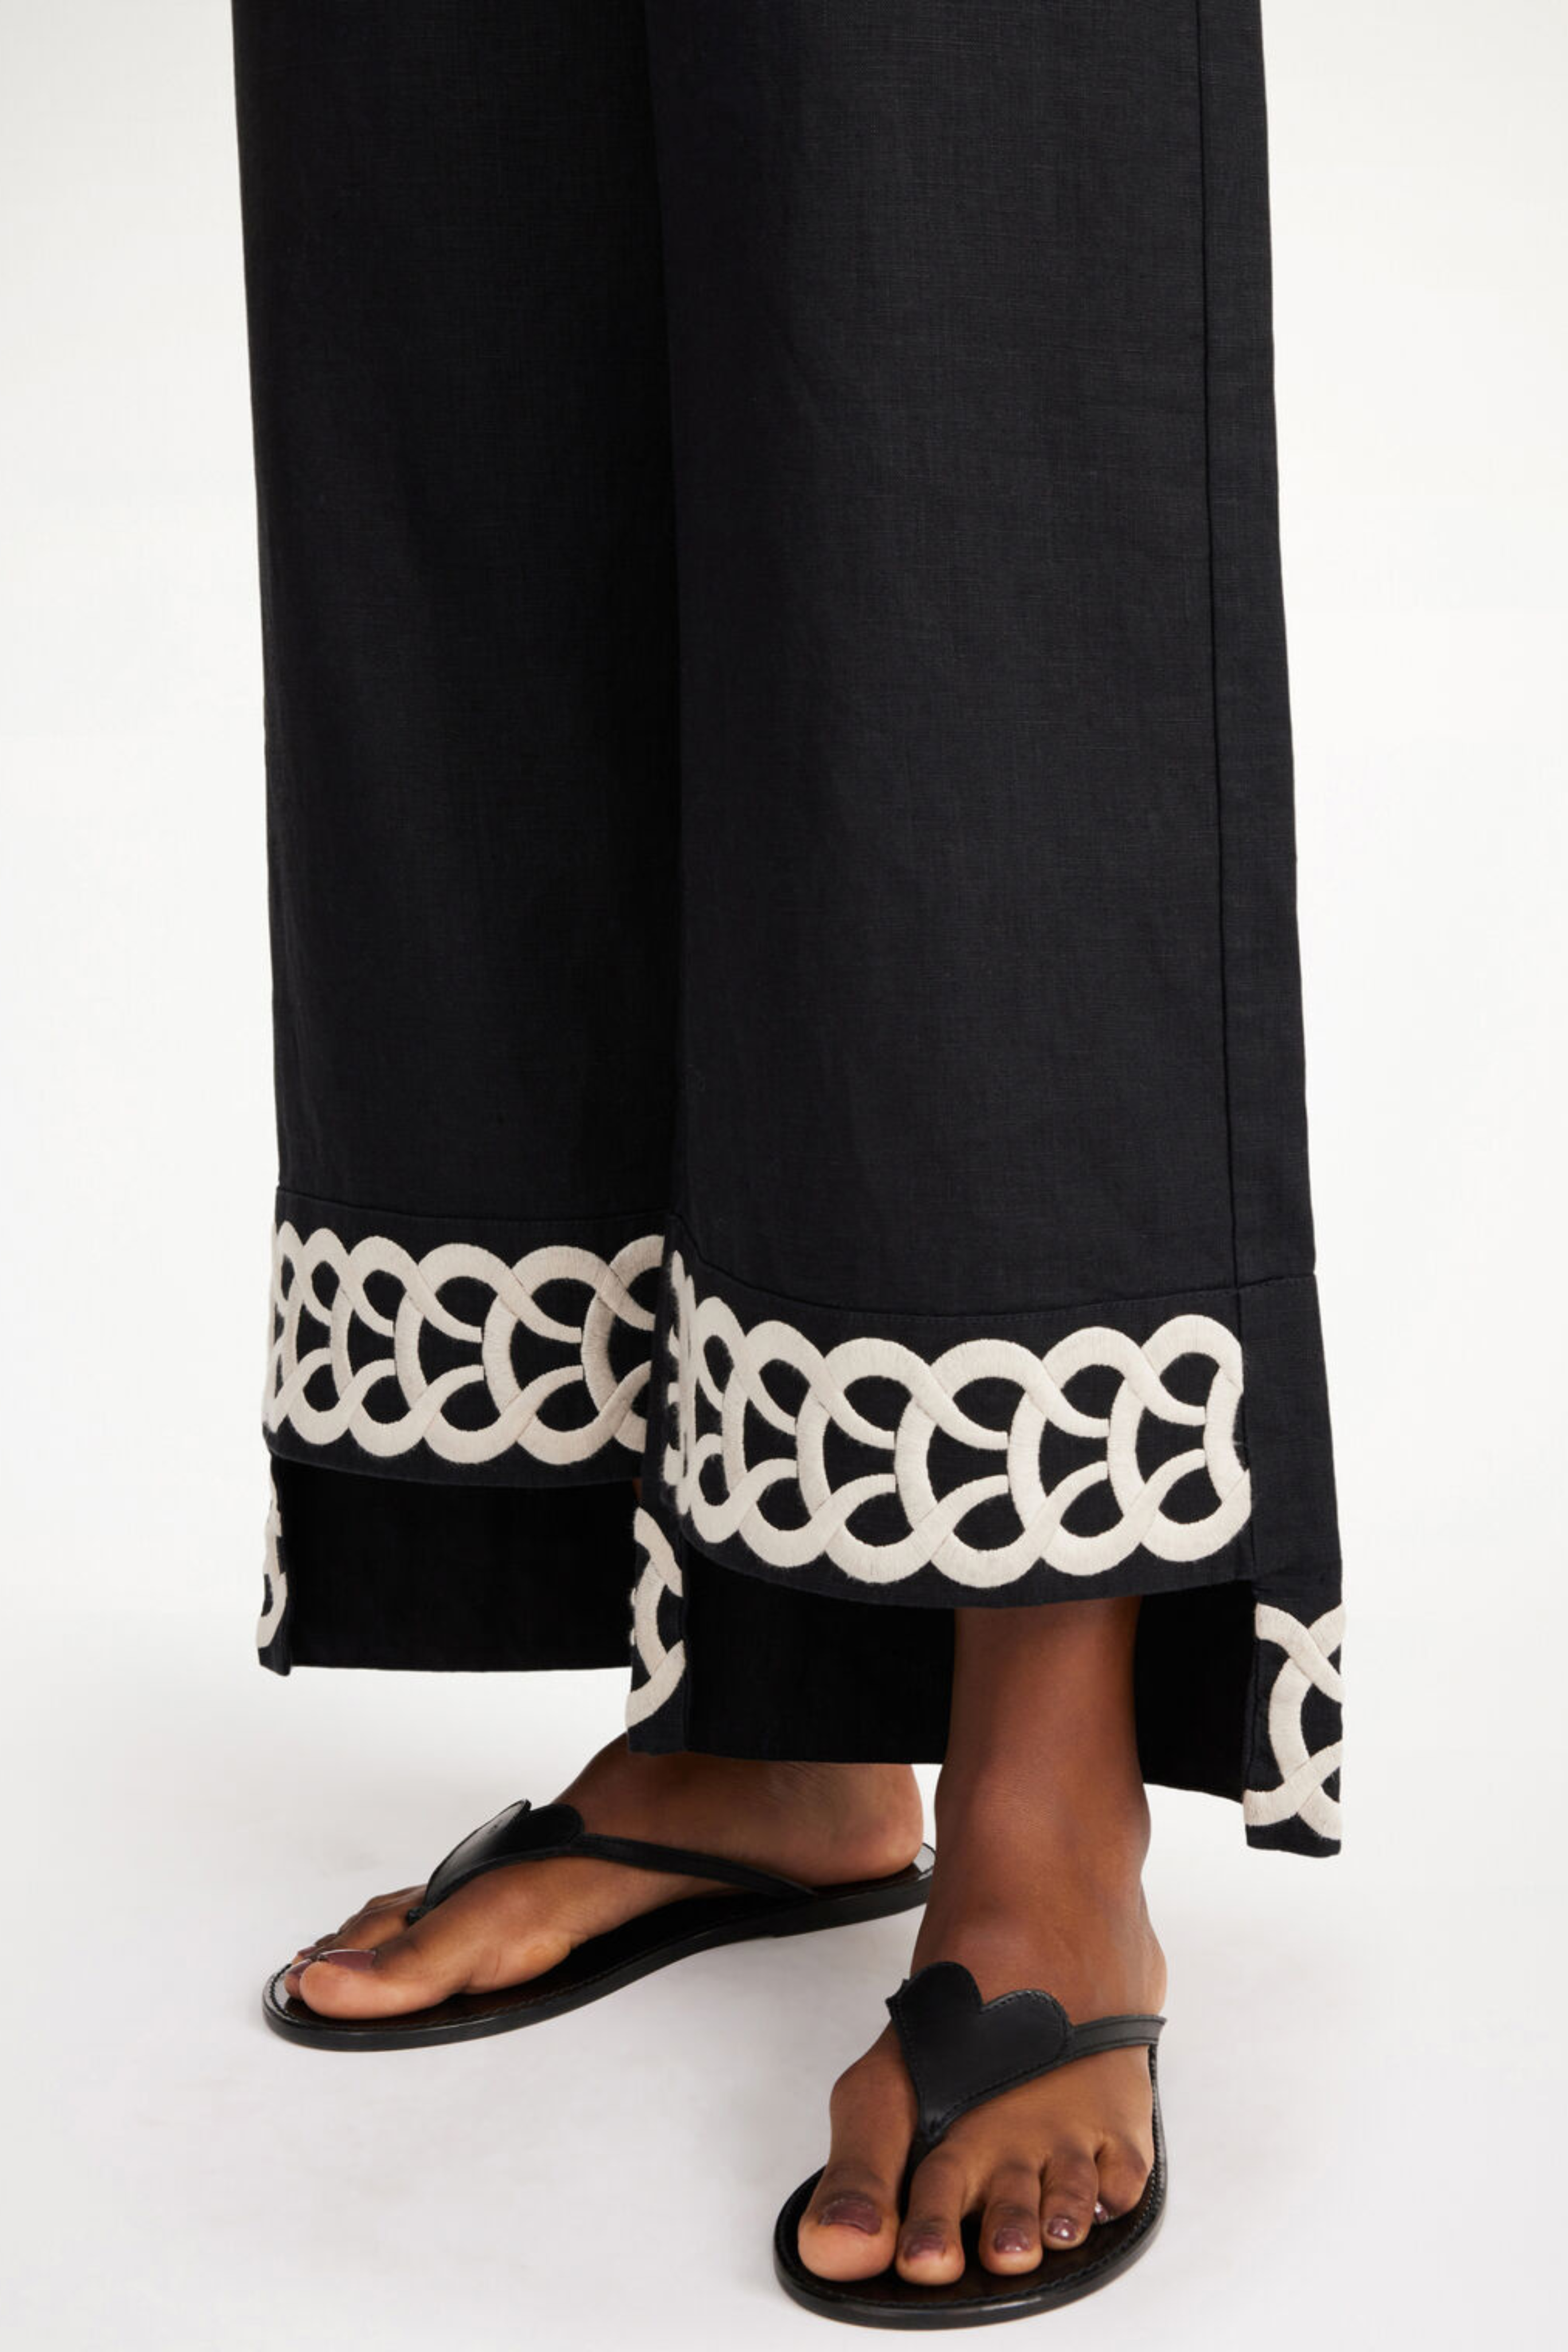 BY MALENE BIRGER Mirabello Embroidered Pants